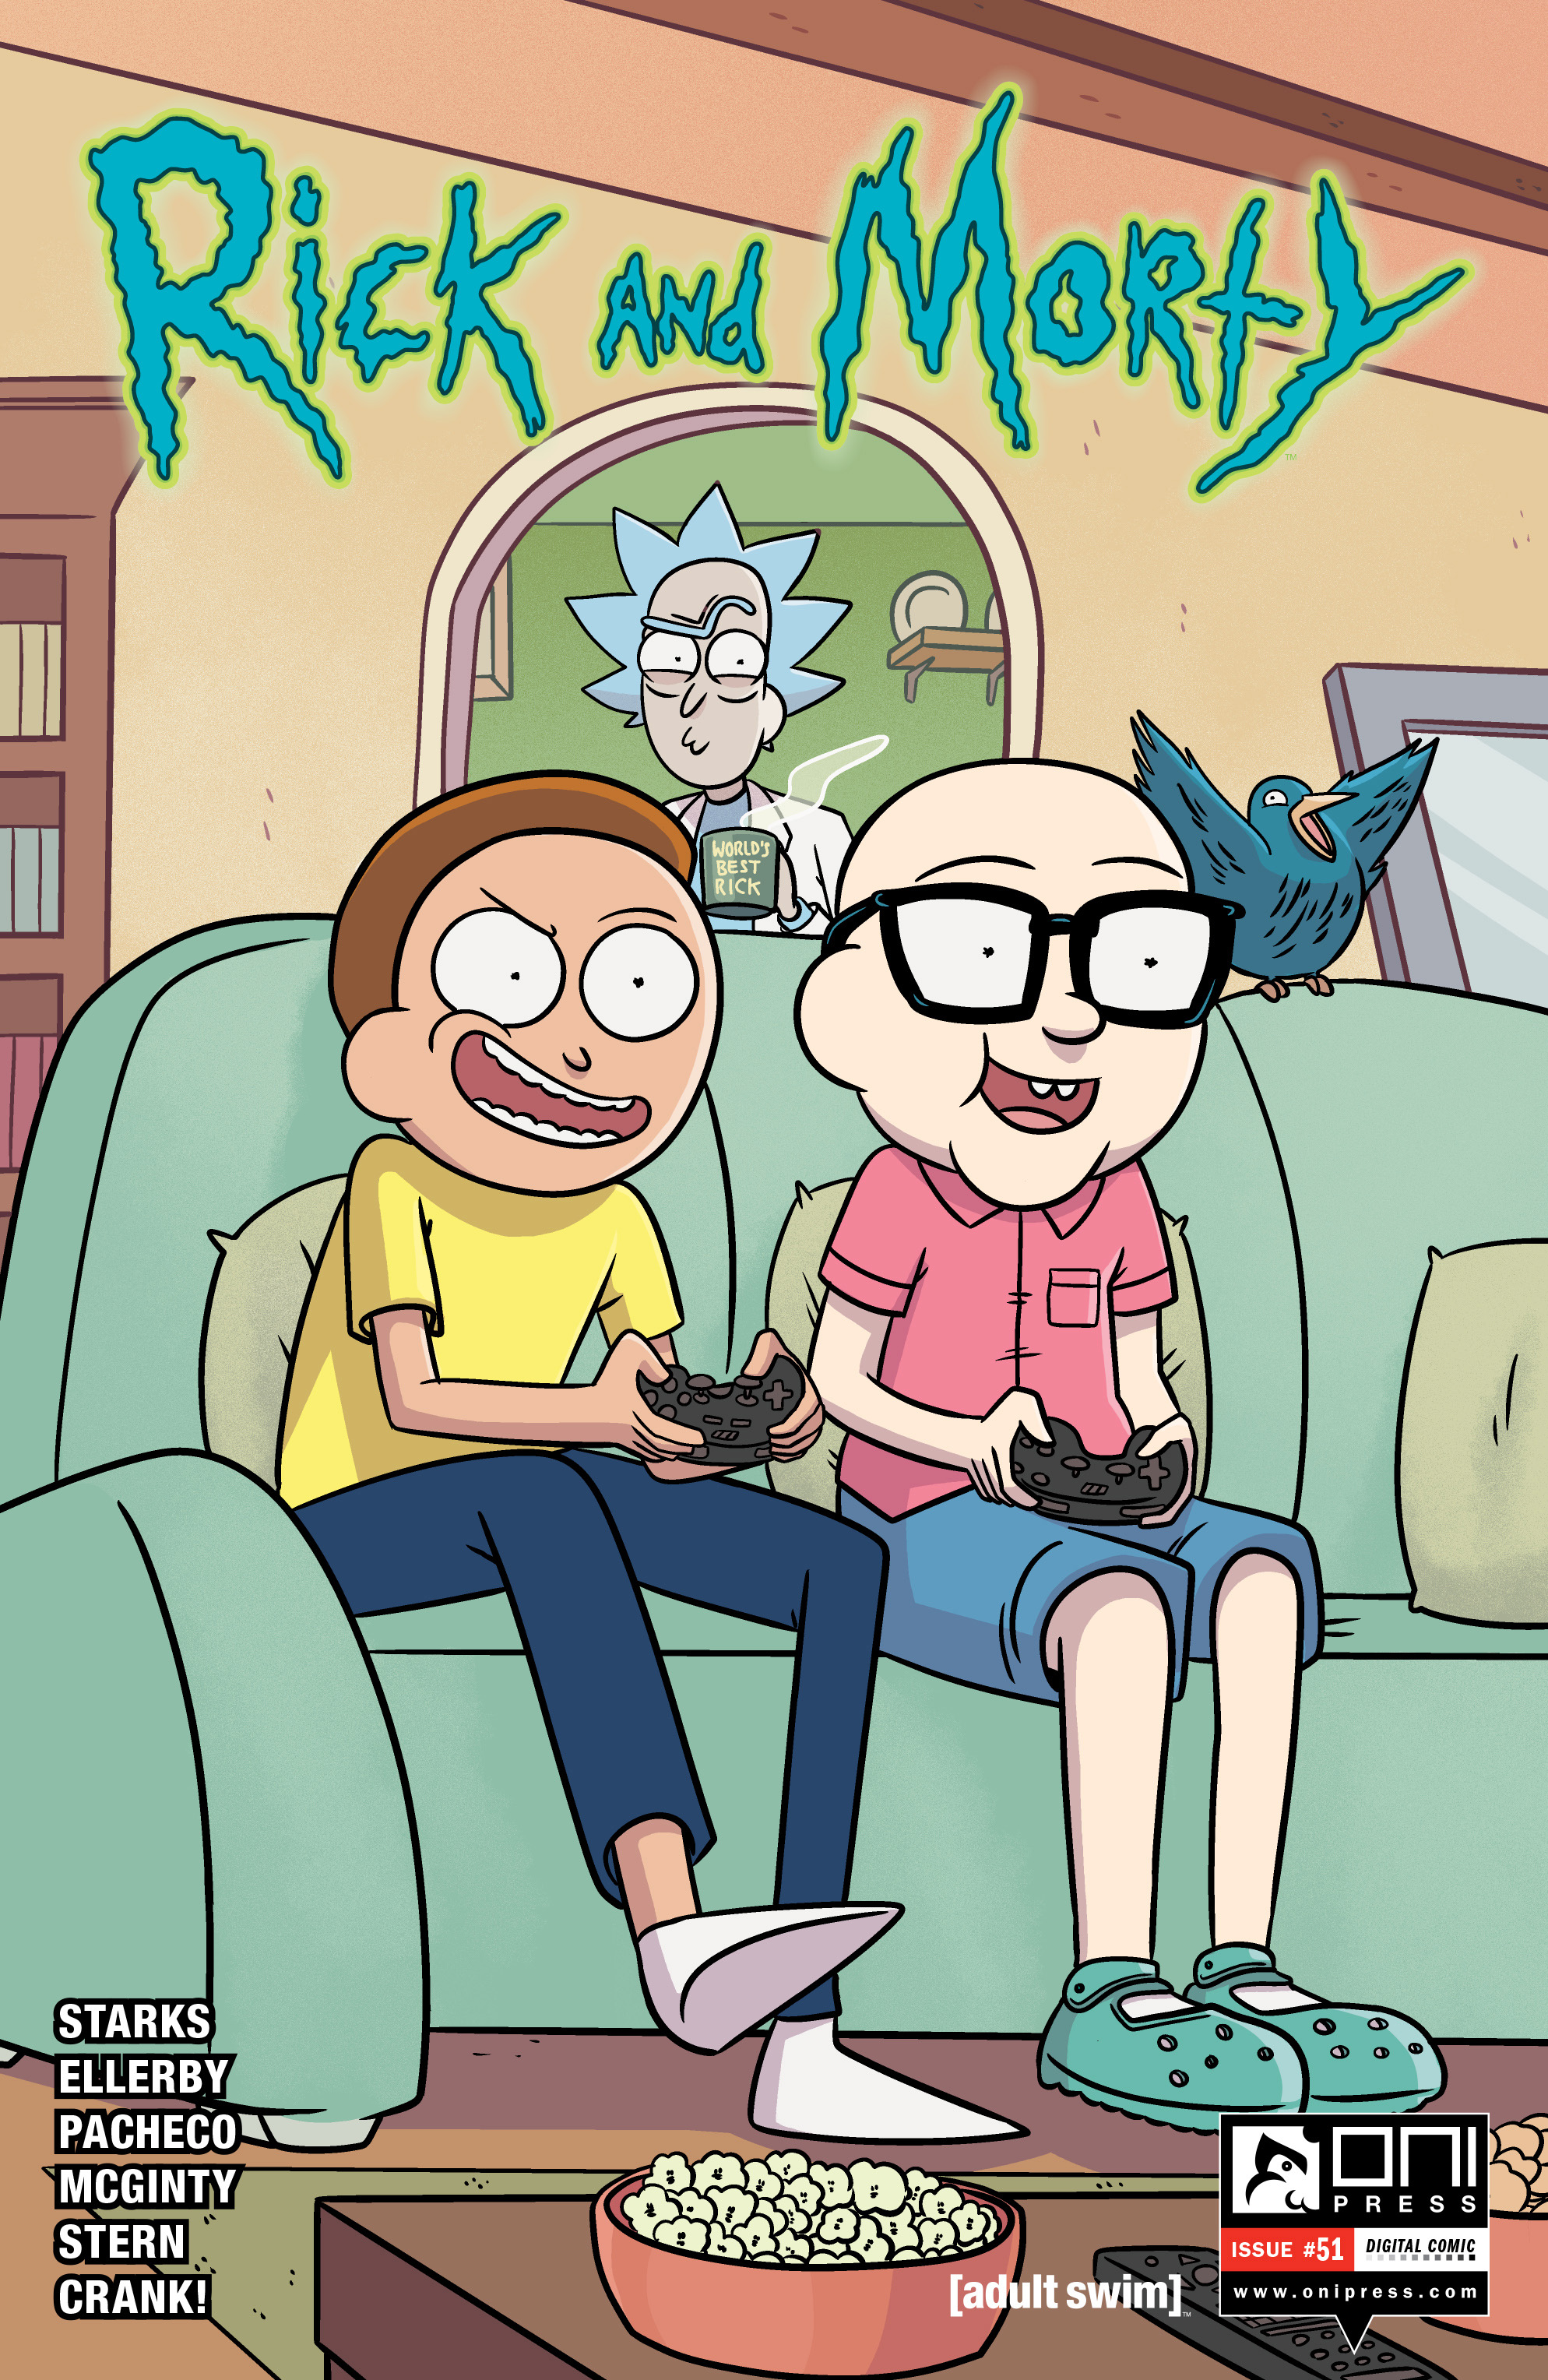 Read online Rick and Morty comic -  Issue #51 - 1